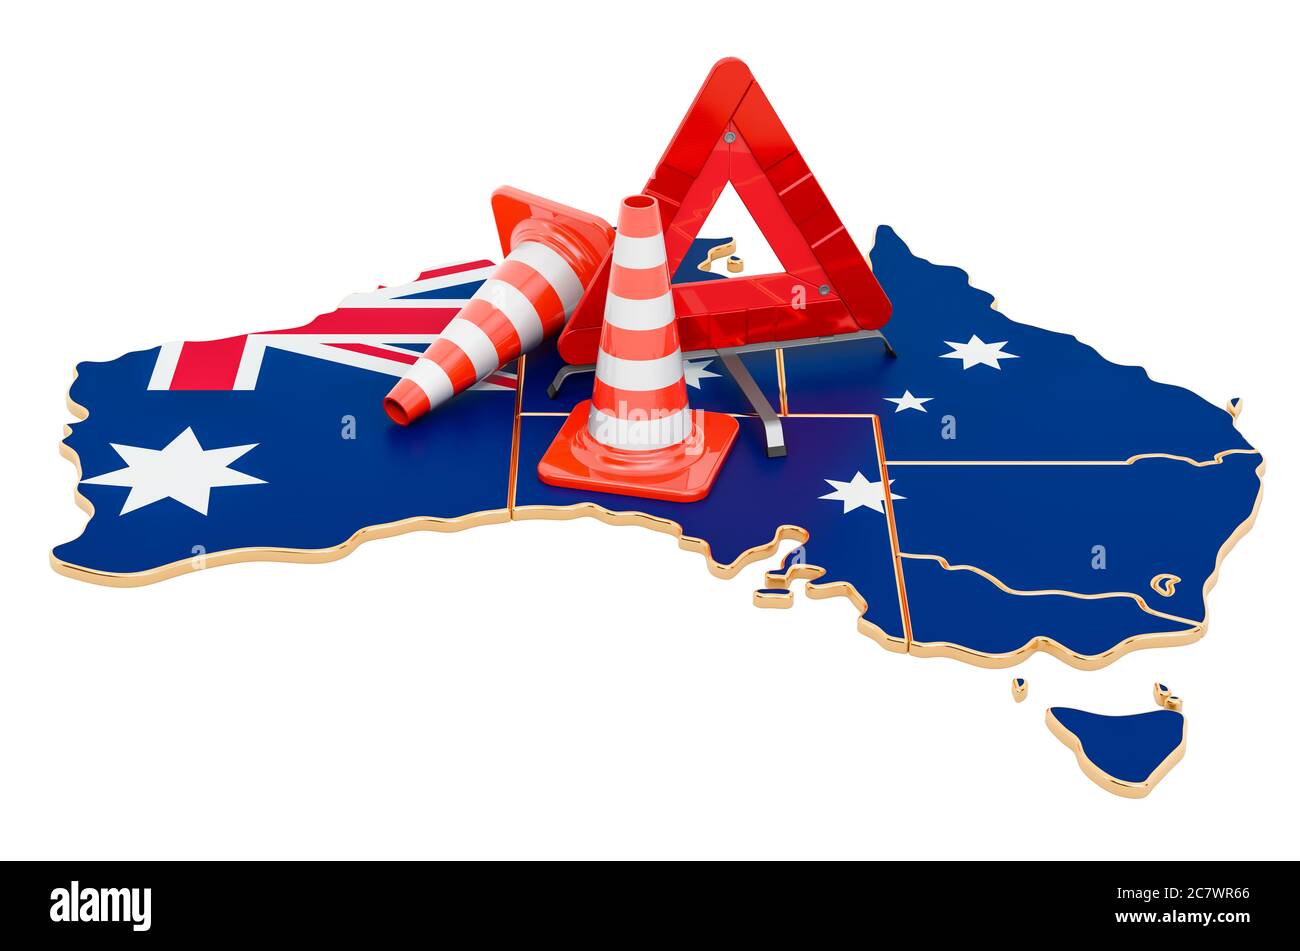 Australian map with traffic cones and warning triangle, 3D rendering isolated on white background Stock Photo